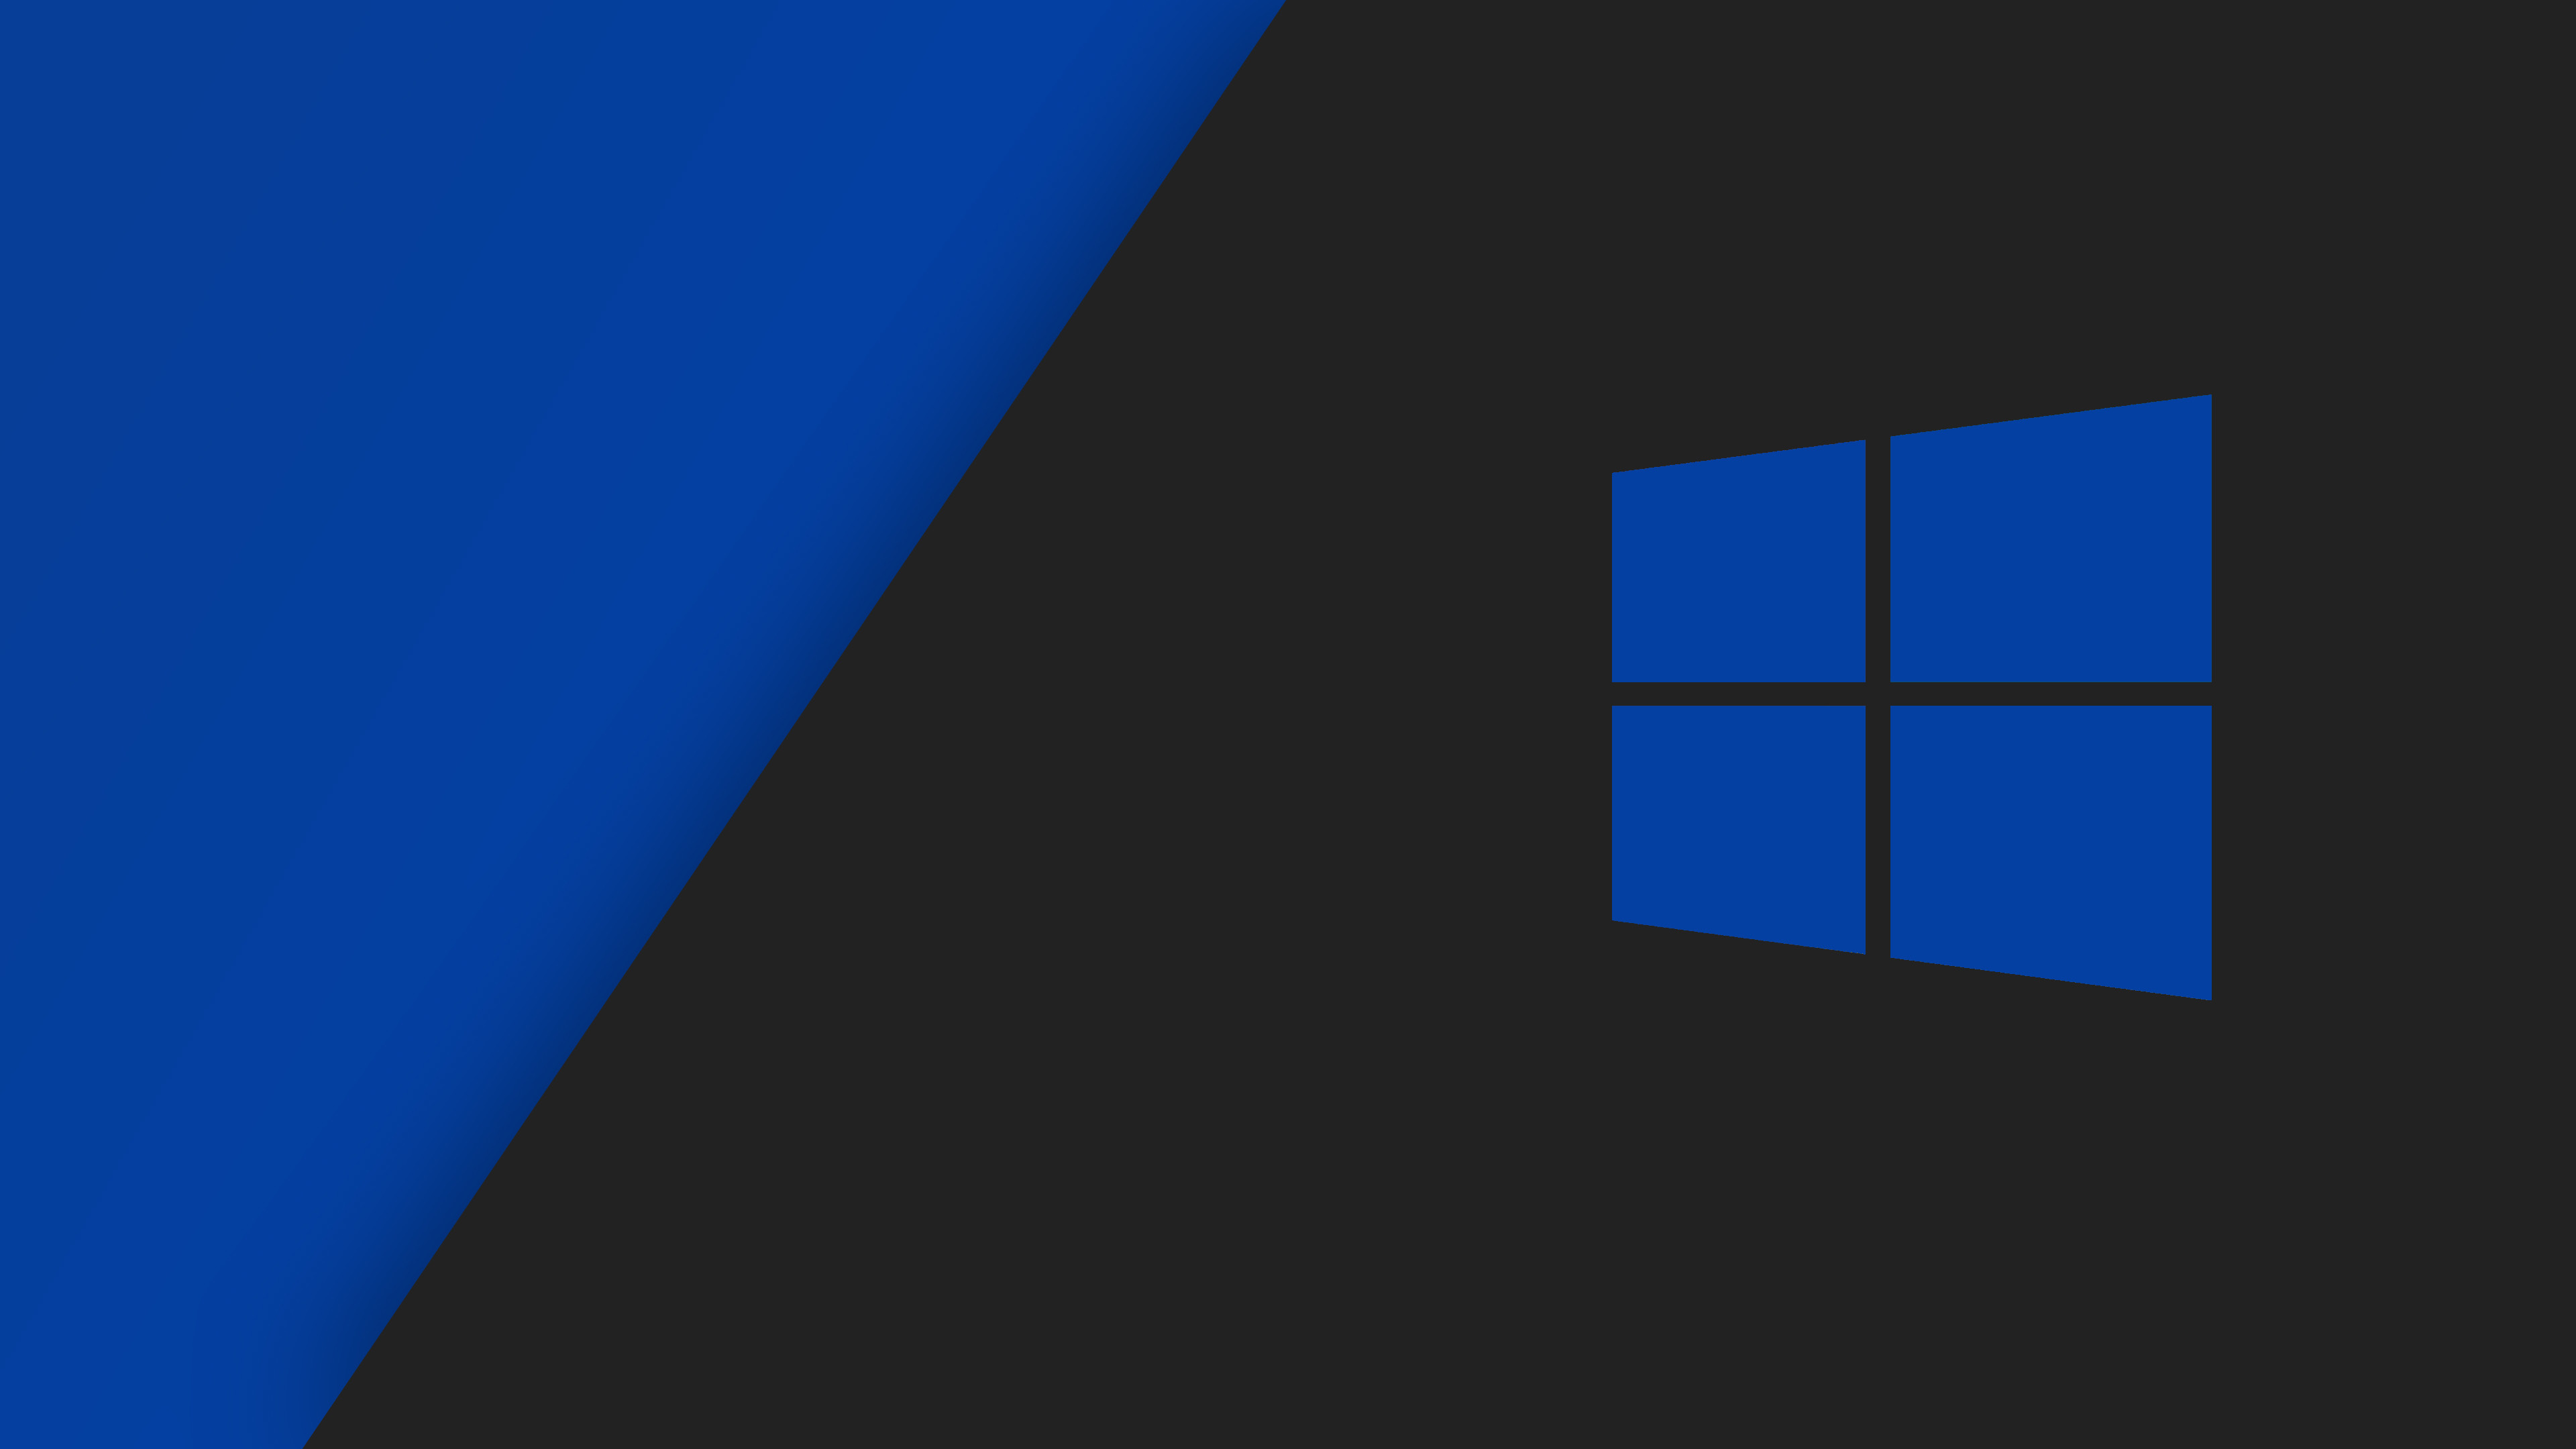 3840x2160 ... 4k Windows 10 Wallpapers High Quality Download Free